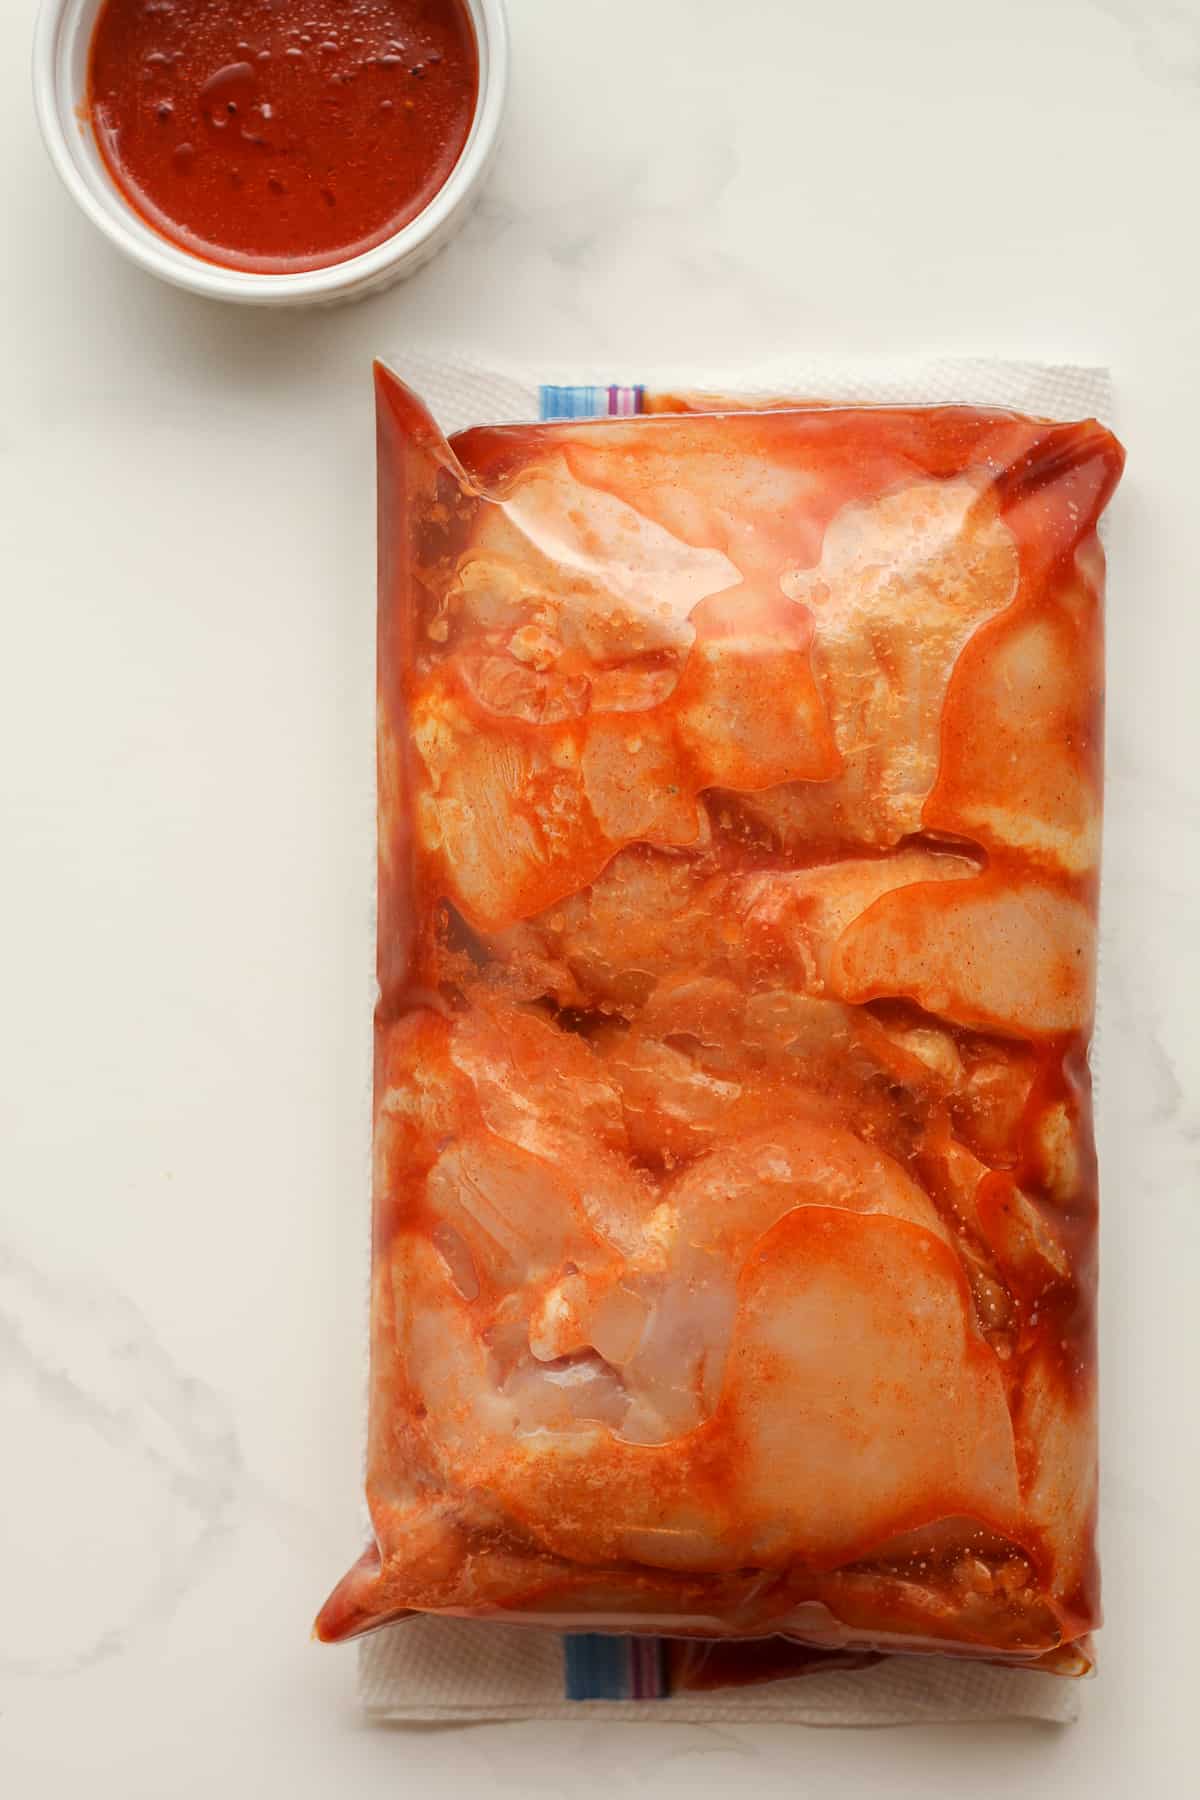 A bag of chicken breasts marinated in buffalo sauce.